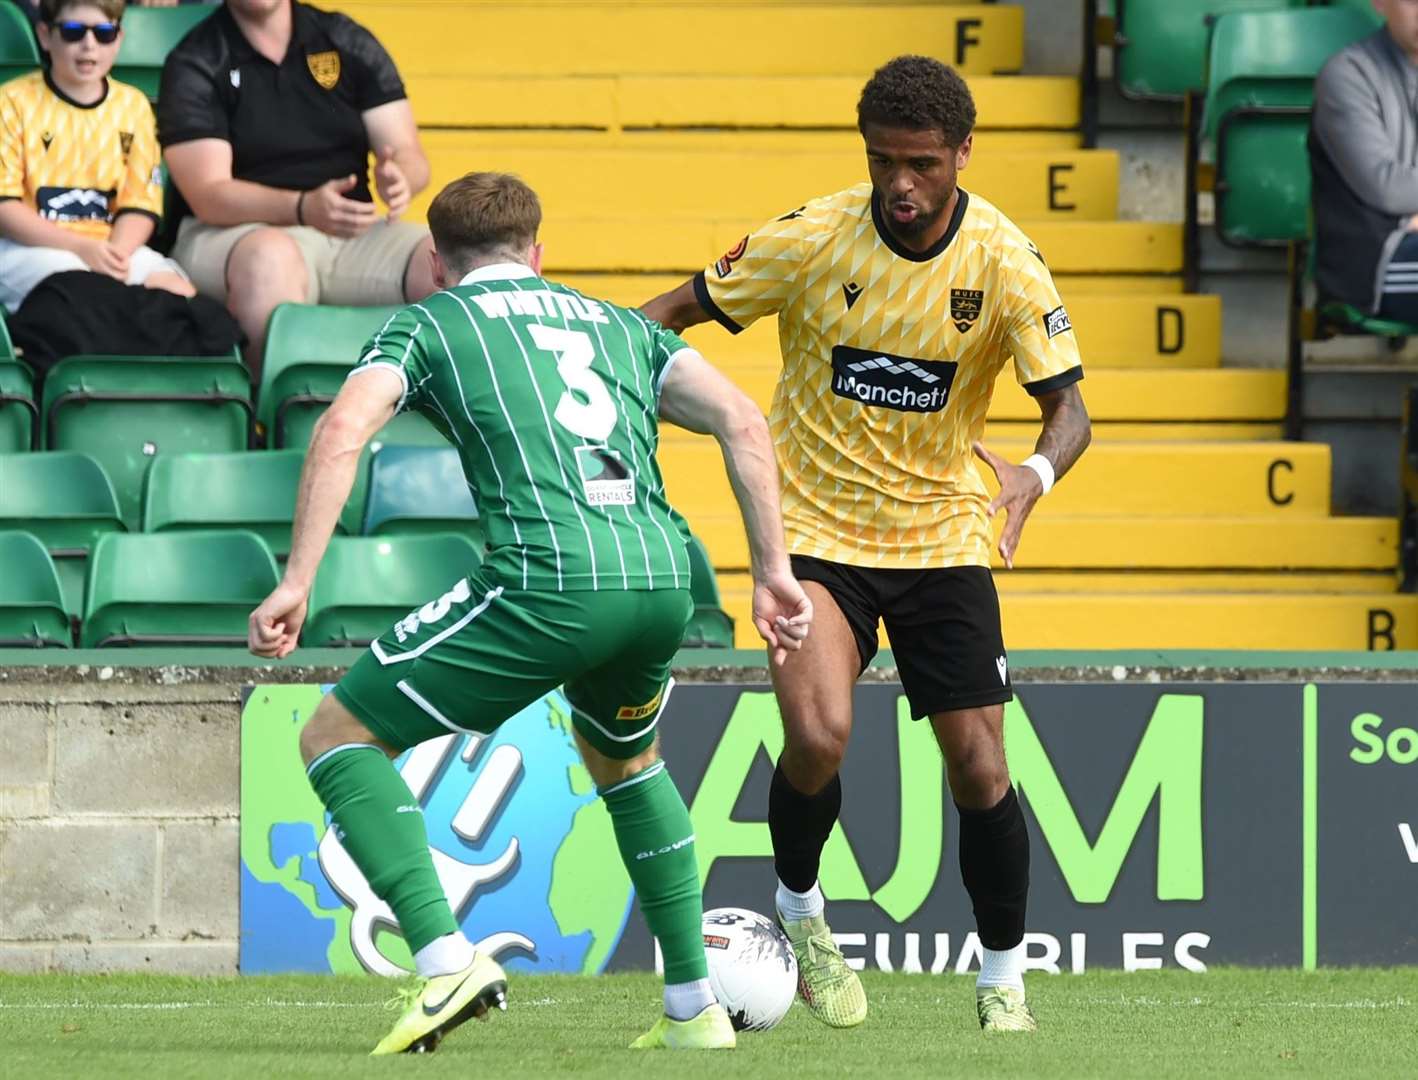 Liam Sole takes the game to Yeovil back in August. Picture: Steve Terrell